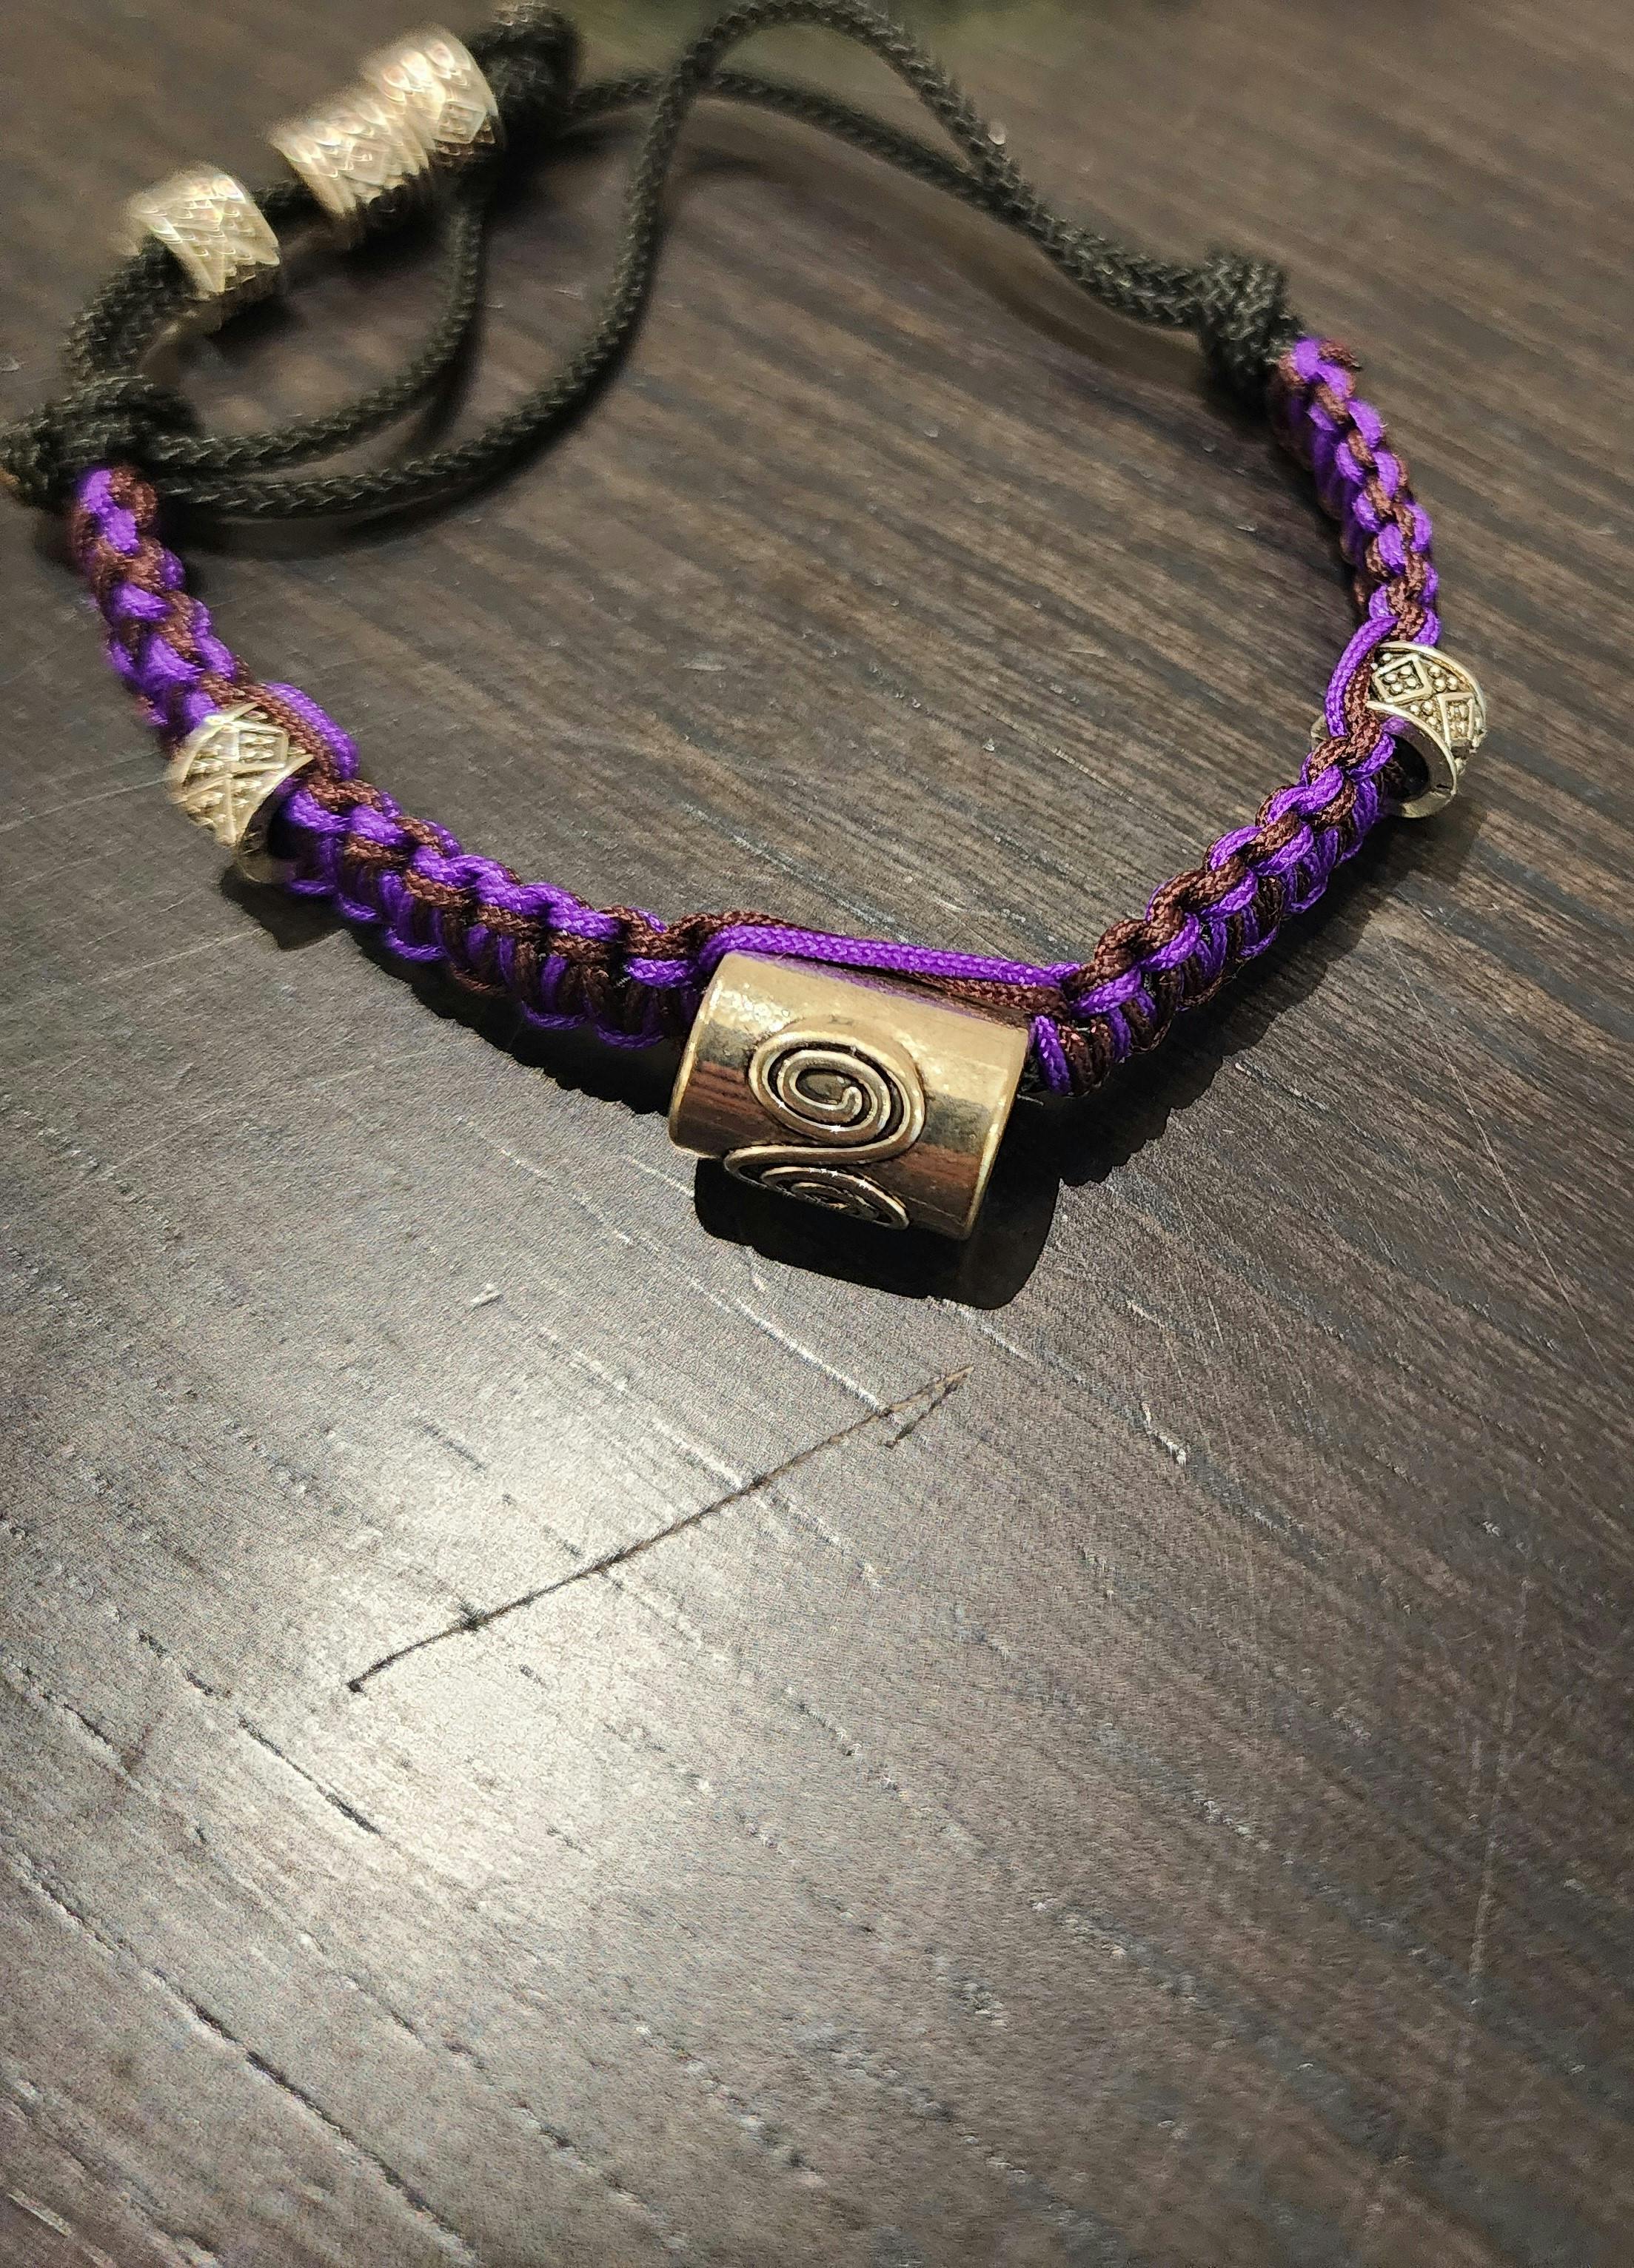 Bracelet made of nylon and paracord with metal beads.